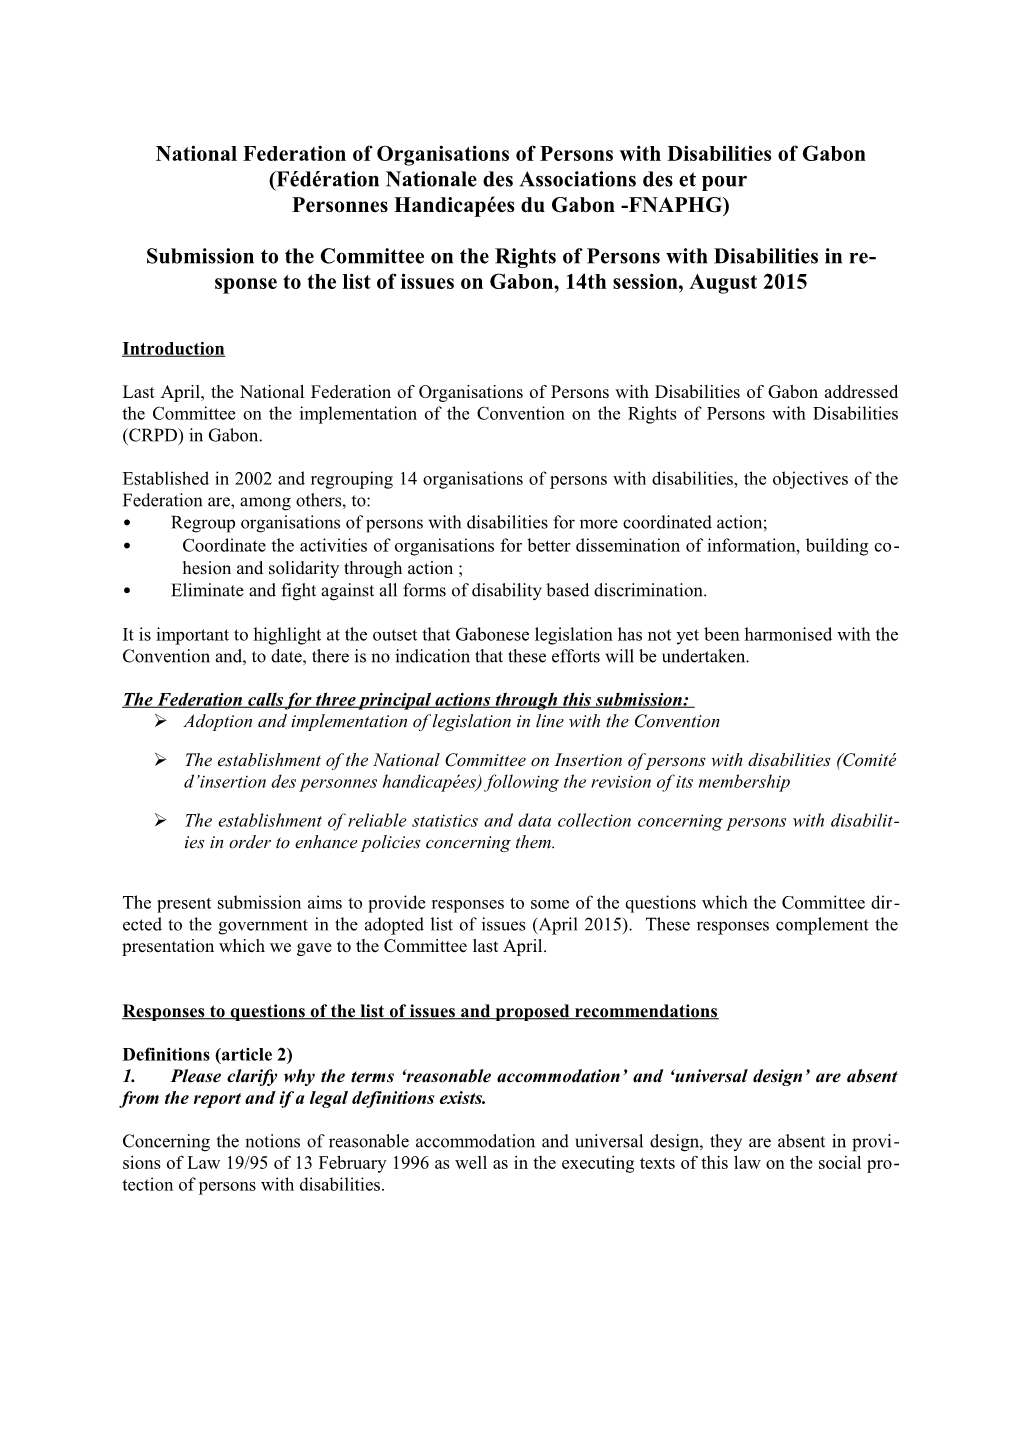 National Federation of Organisations of Persons with Disabilities of Gabon (Fédération